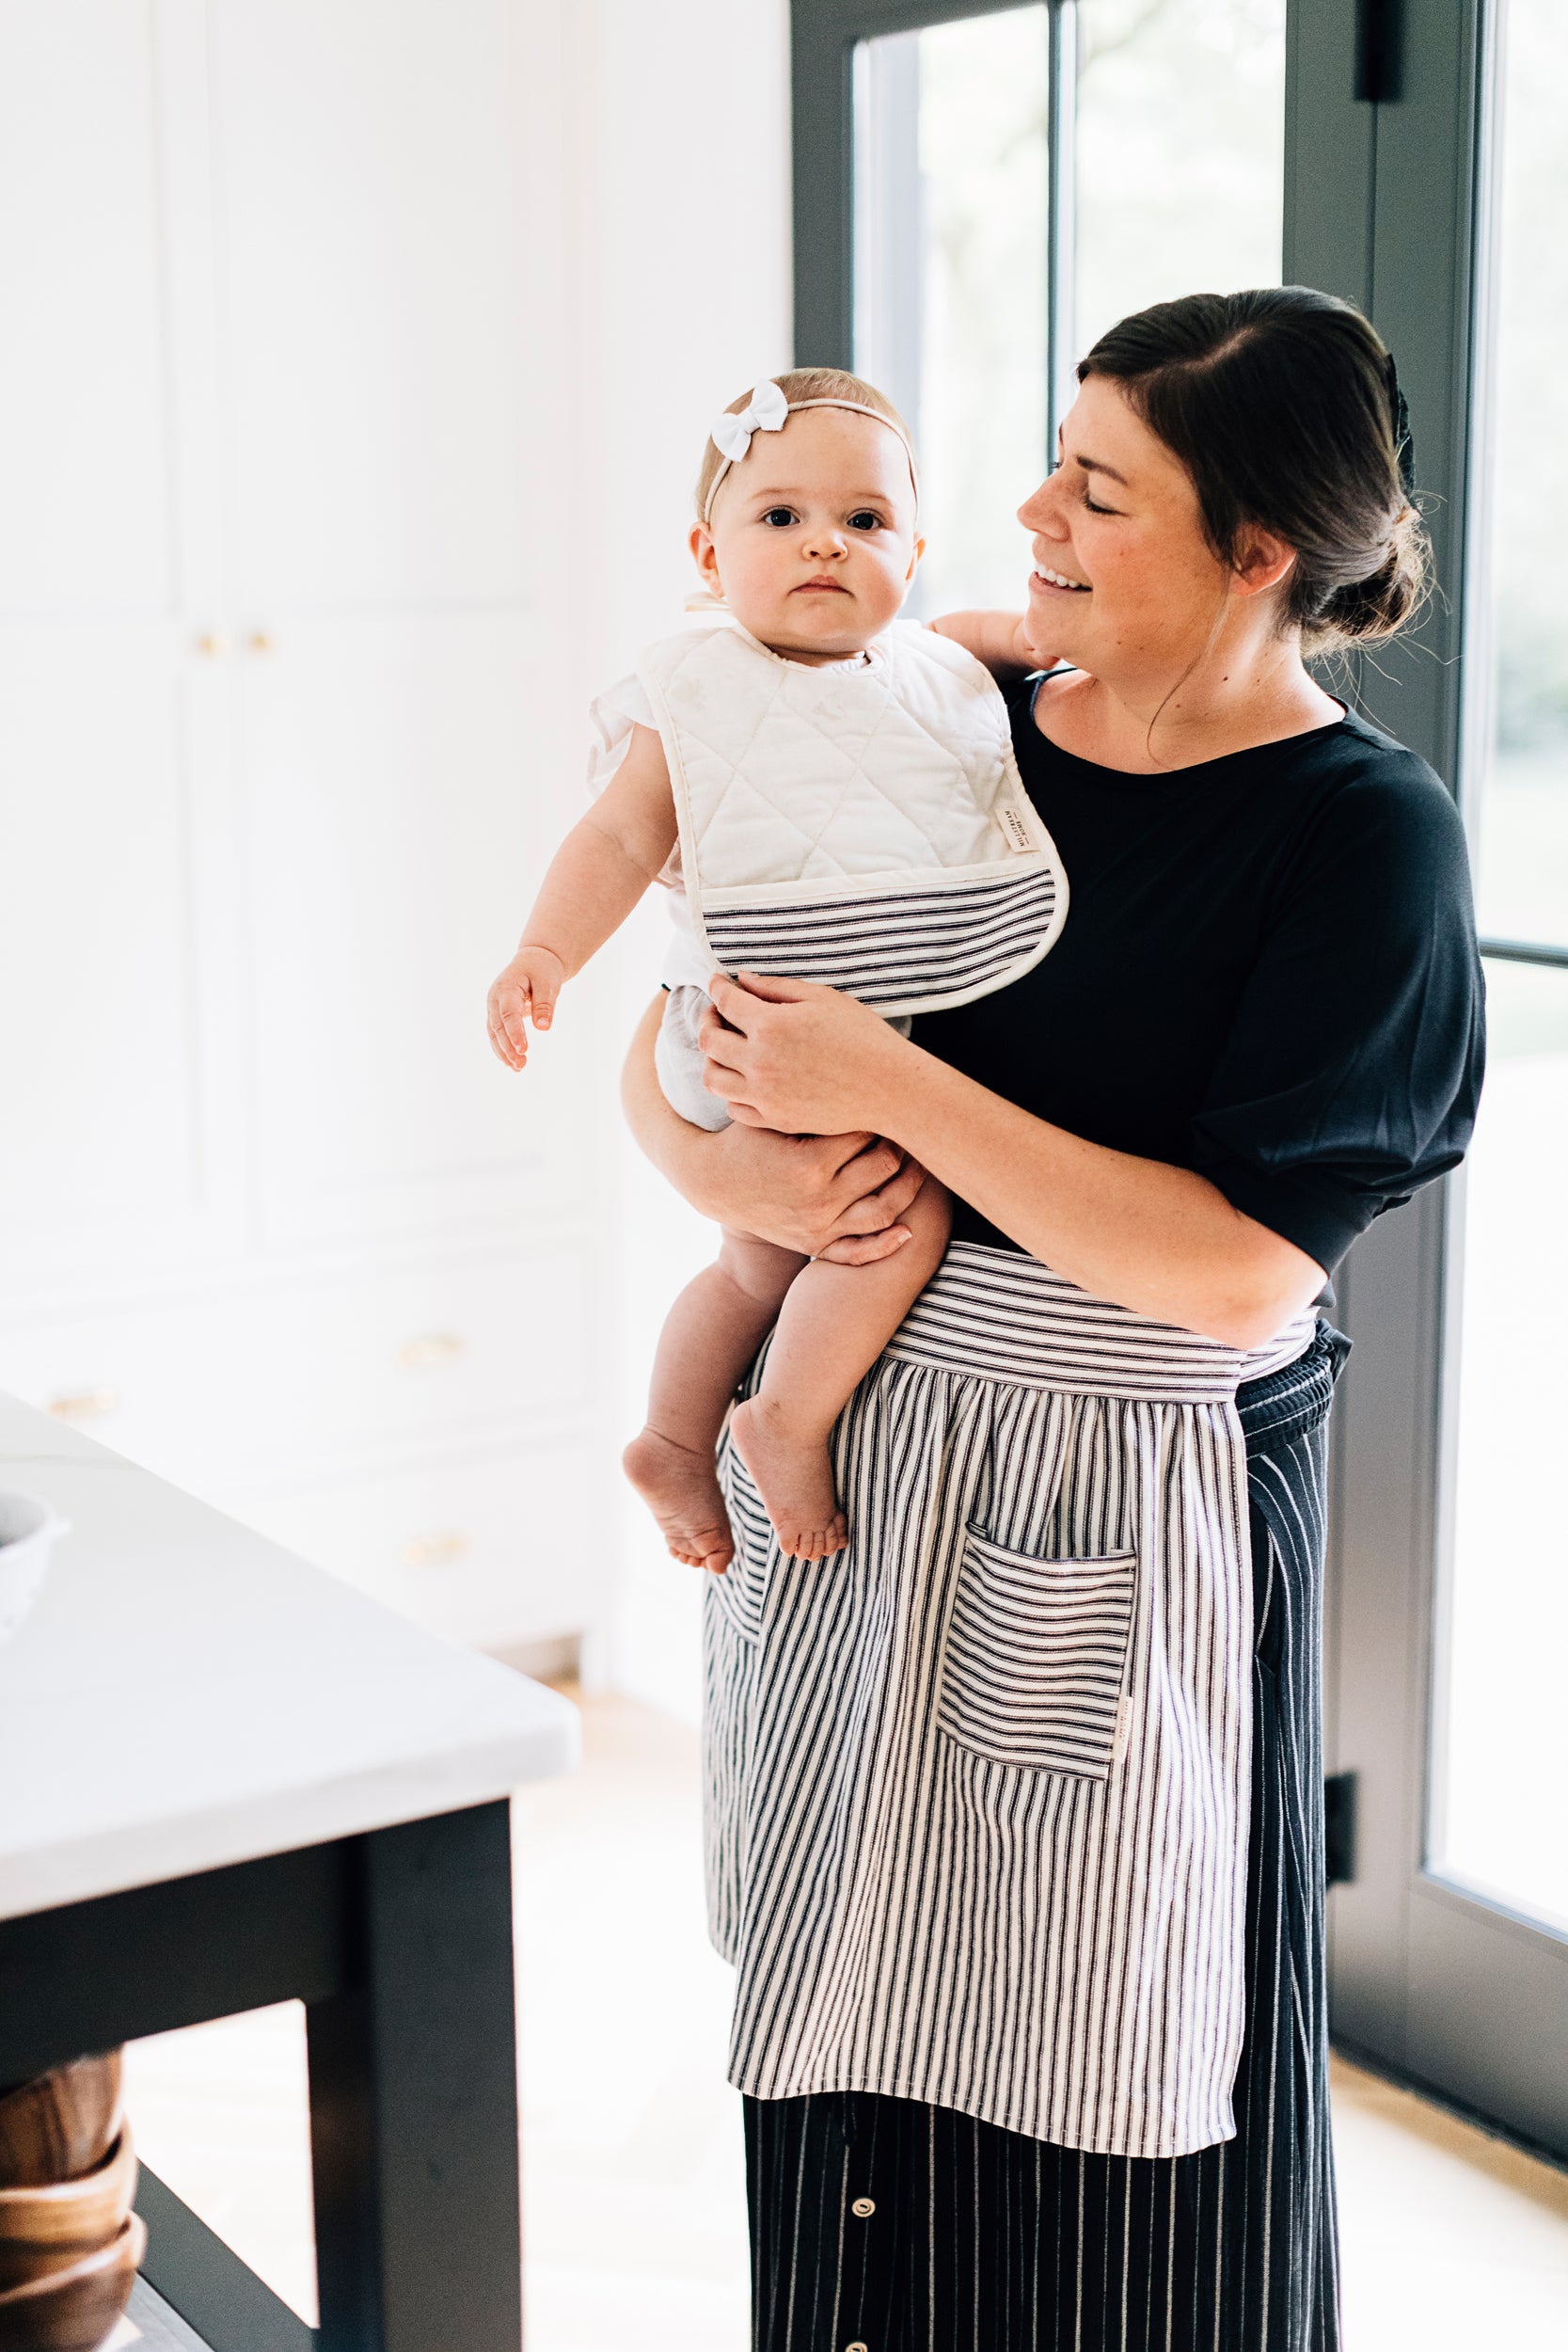 The Adult Ticking Apron on a Model Holding a Baby